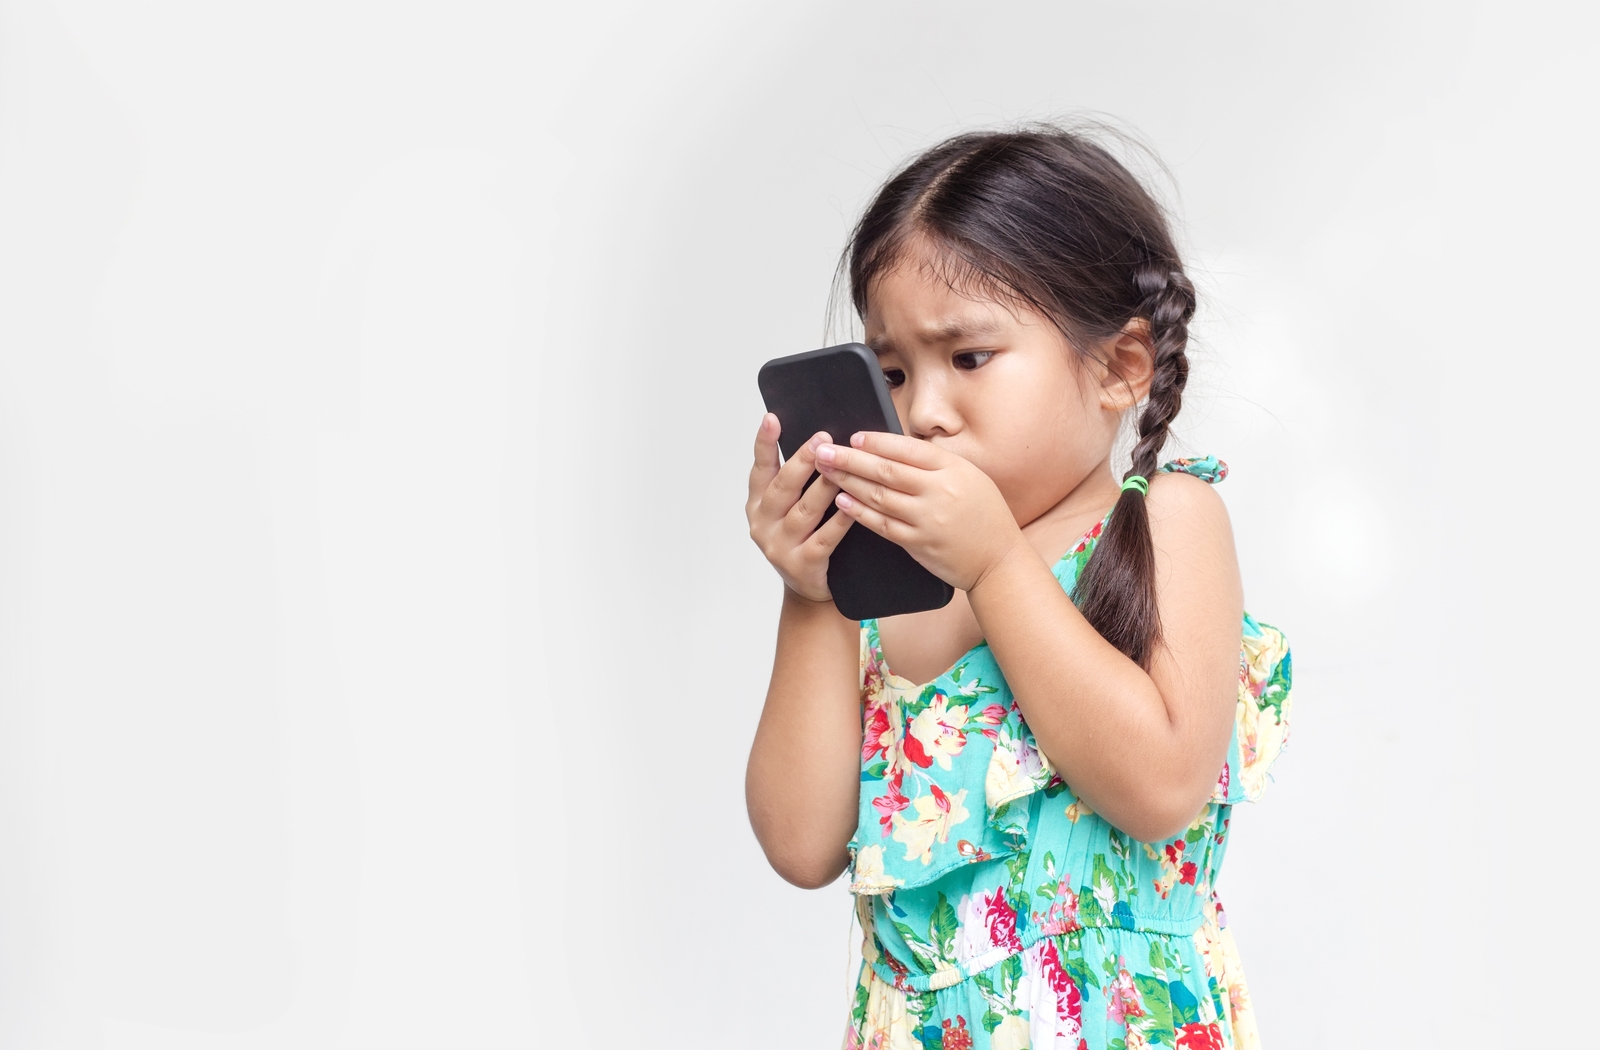 A young girl in front of a white background holding a cell phone extremely close to her face as she is nearsighted due to her myopia